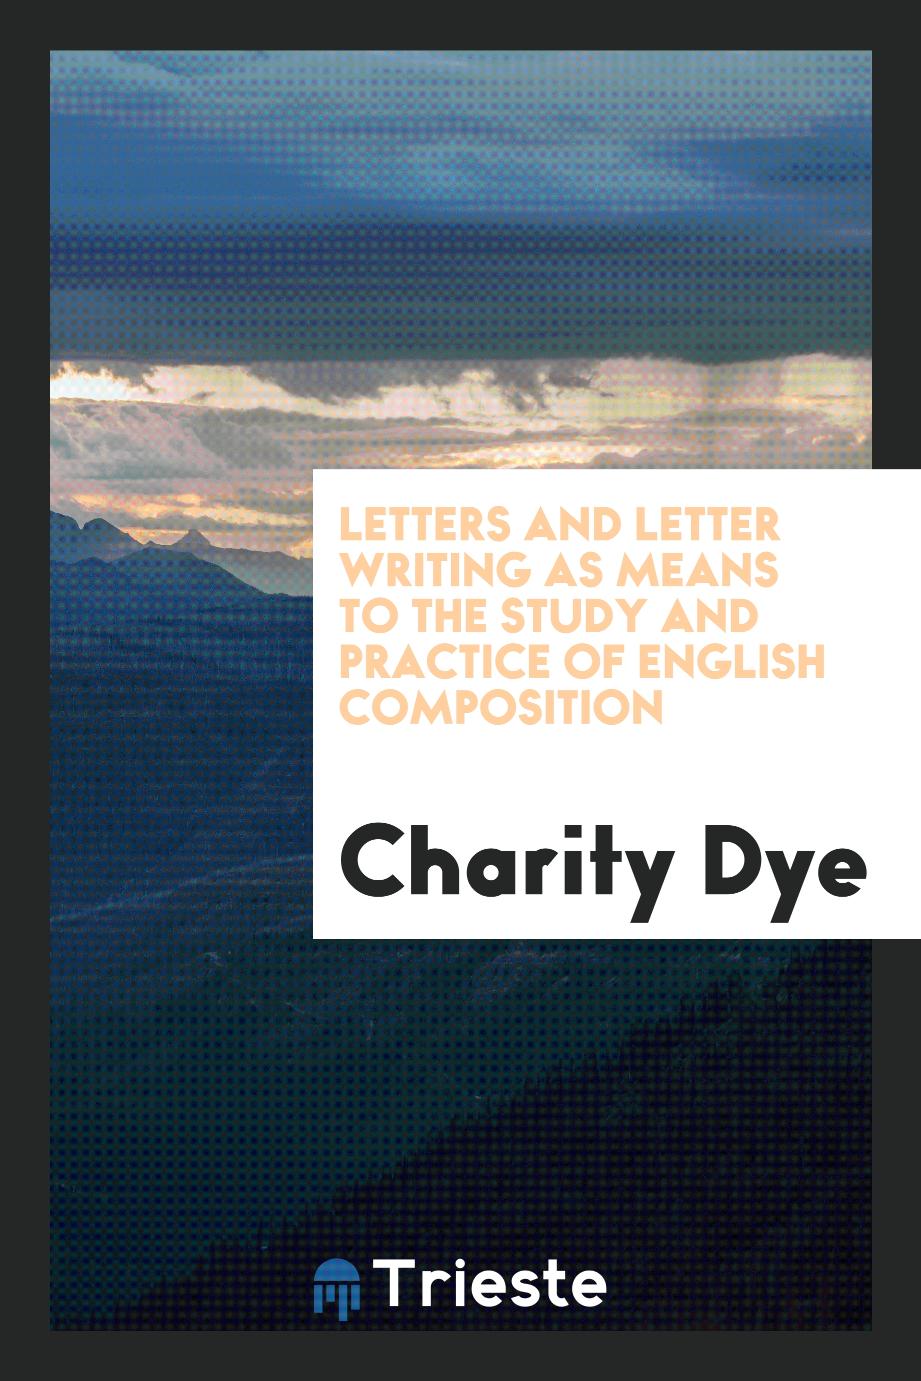 Letters and letter writing as means to the study and practice of English composition